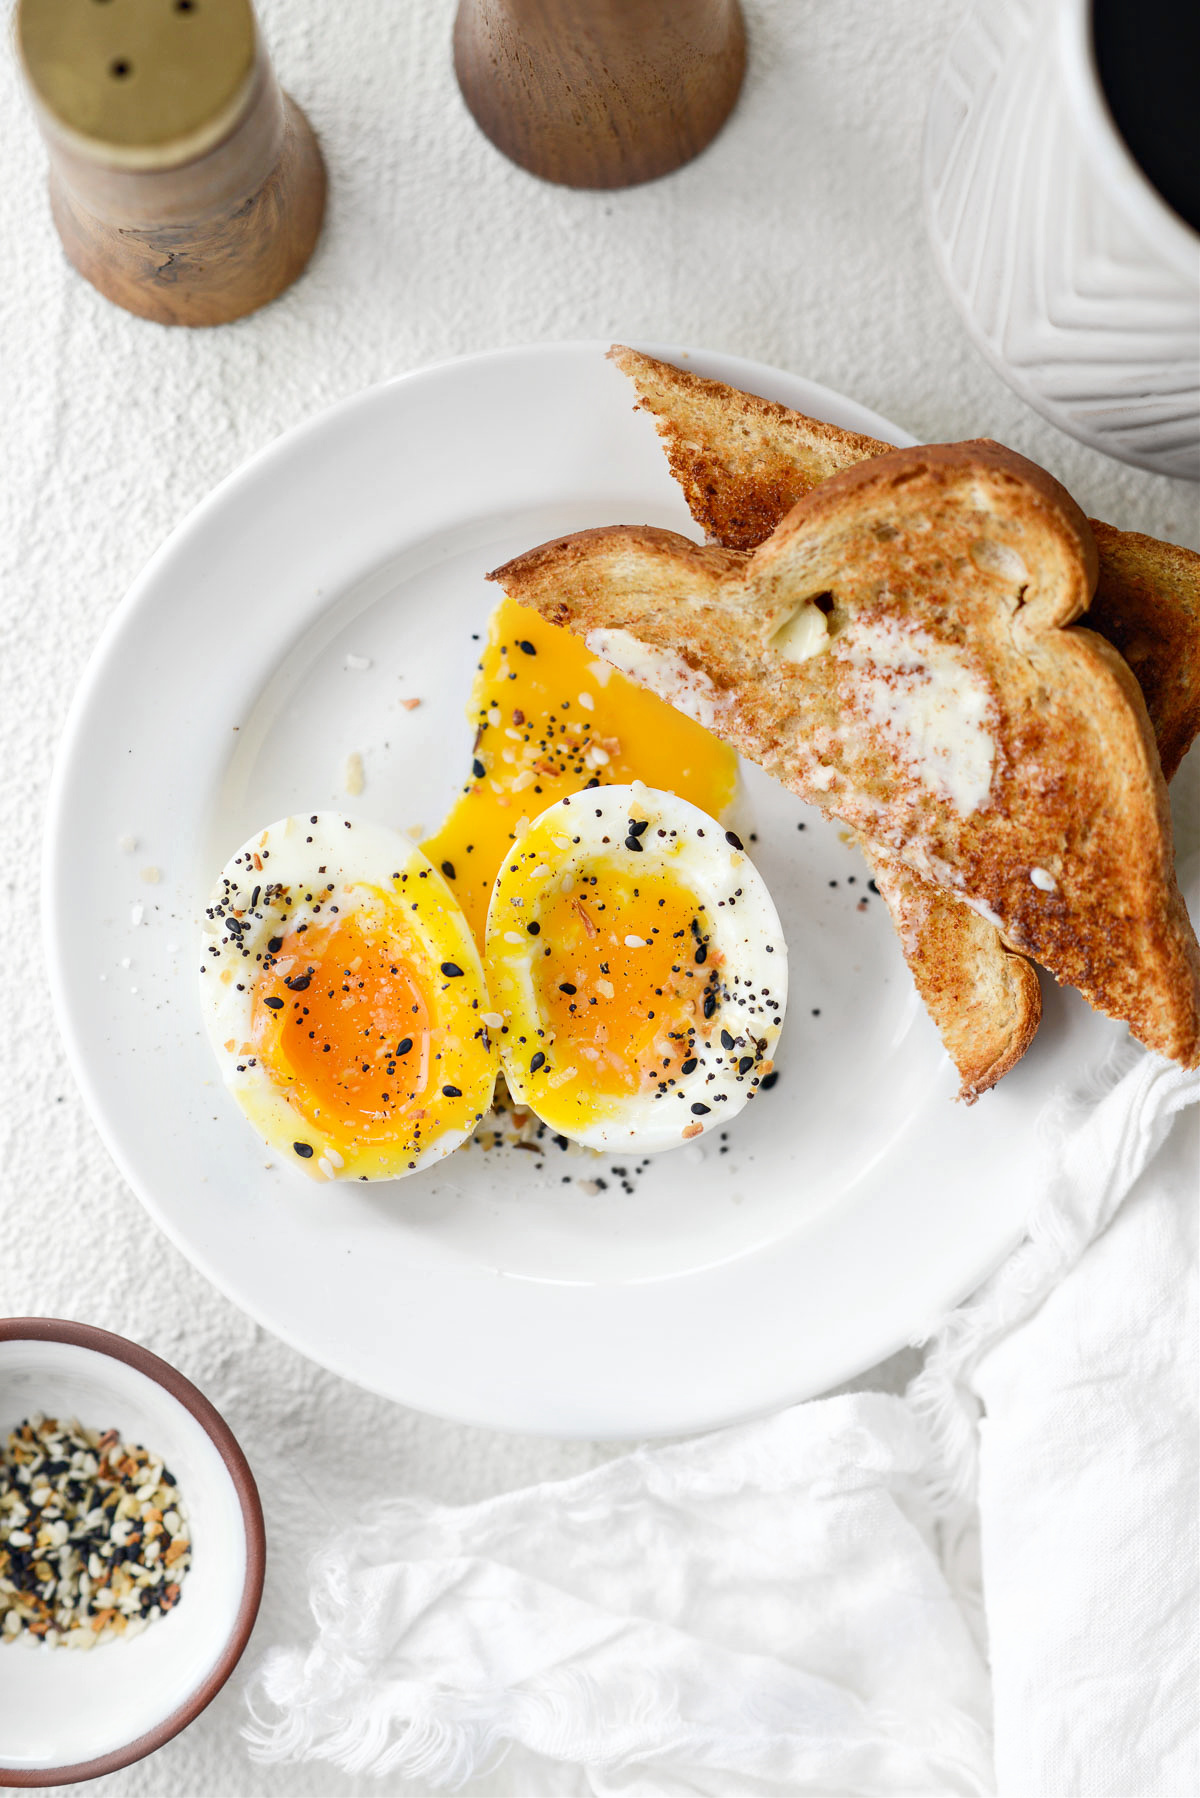 https://www.simplyscratch.com/wp-content/uploads/2021/03/Perfect-Soft-Boiled-Eggs-l-SimplyScratch.com-eggs-howto-softboiledeggs-softboiled-breakfast-brunch-14.jpg